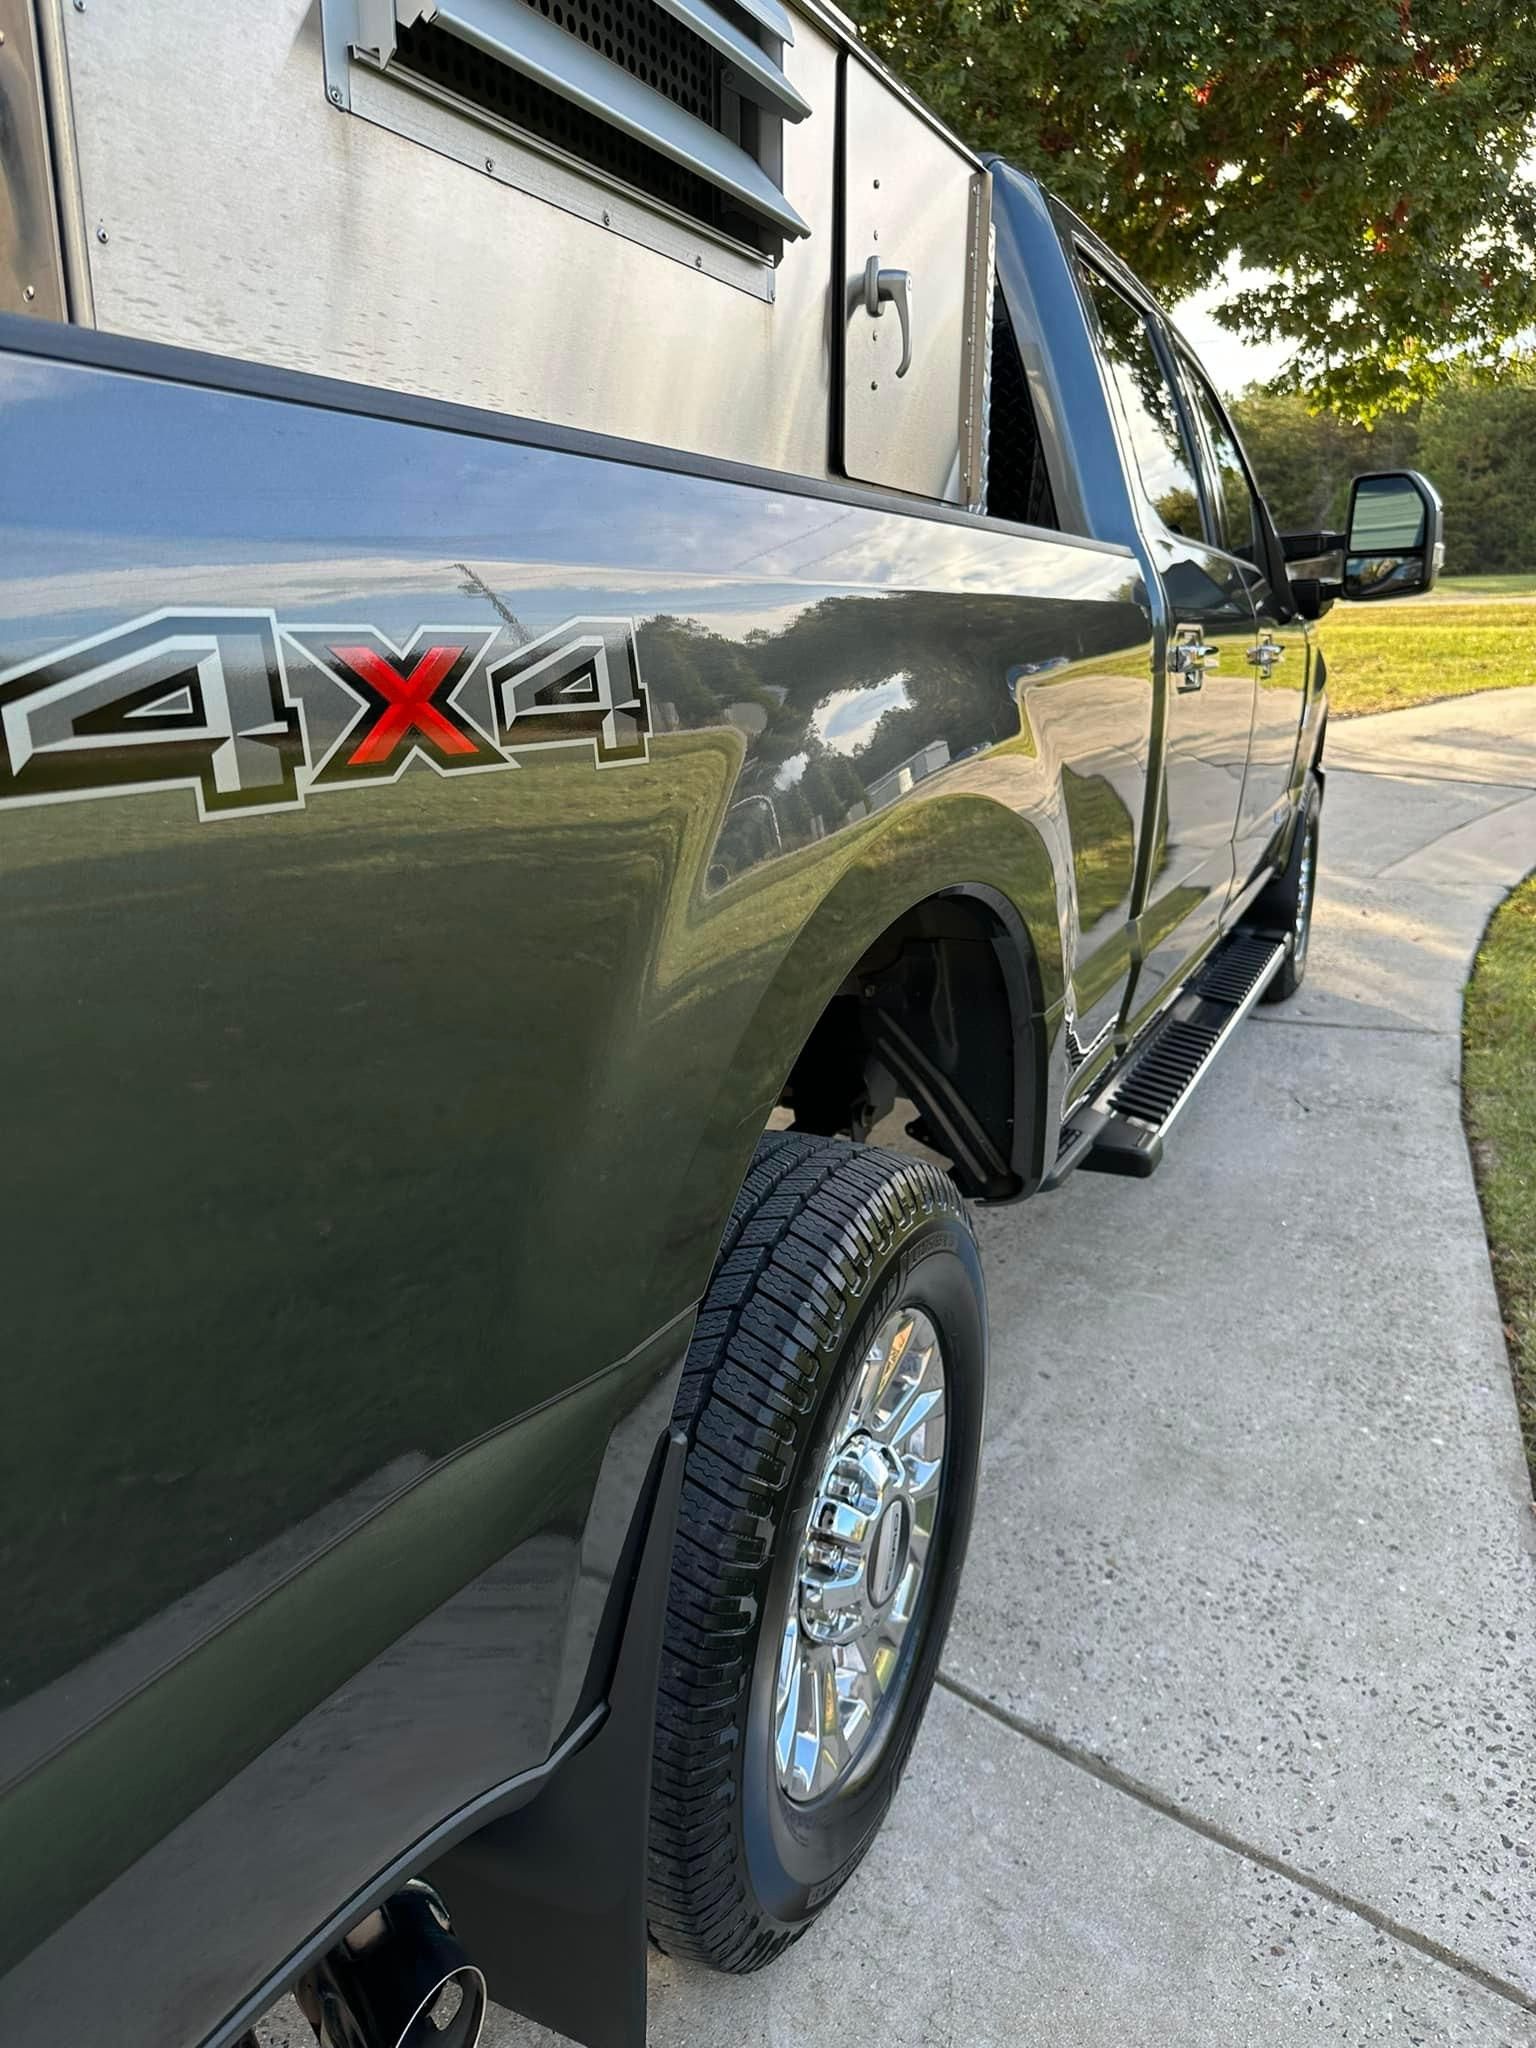 Ceramic Coating for Diamond Touch Auto Detailing in Taylorsville, NC